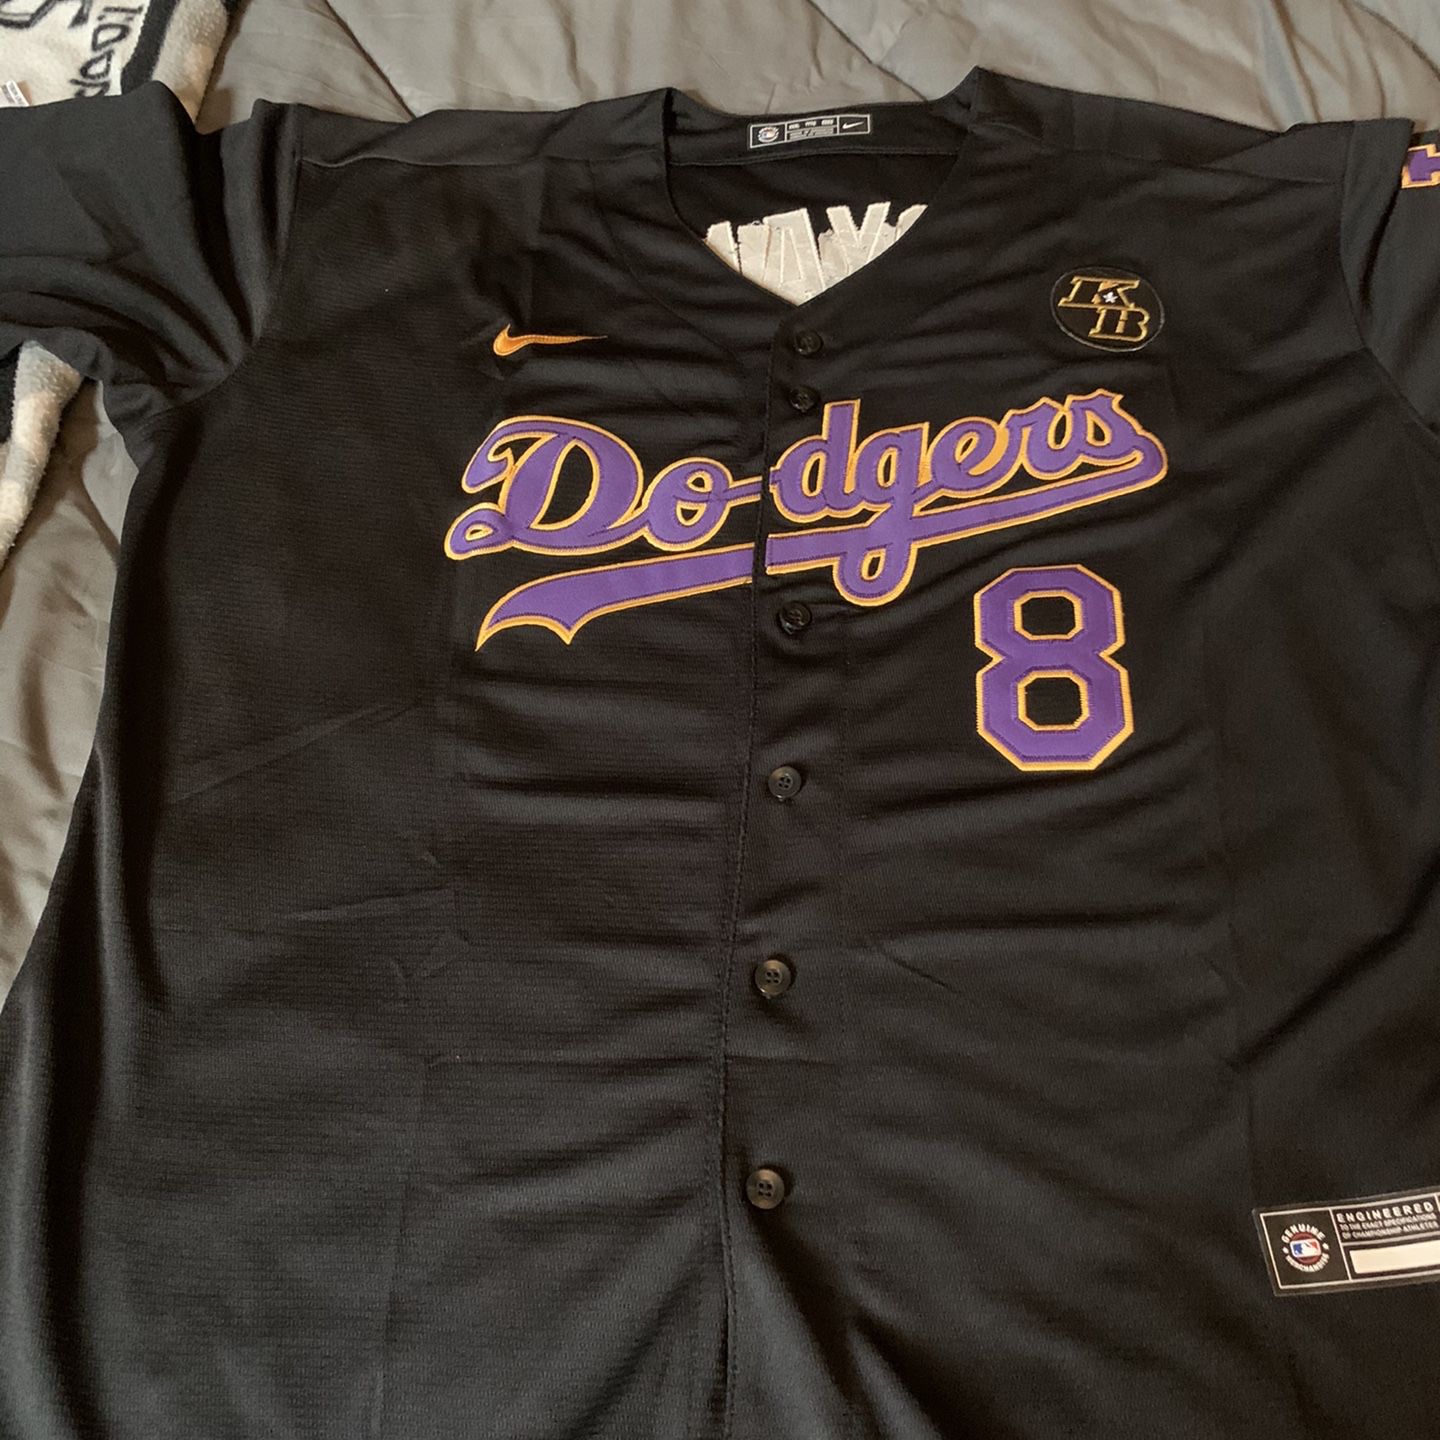 Dodgers Baseball Jersey In LA Lakers Colors A Tribute To Kobe for Sale in  Swedesboro, NJ - OfferUp